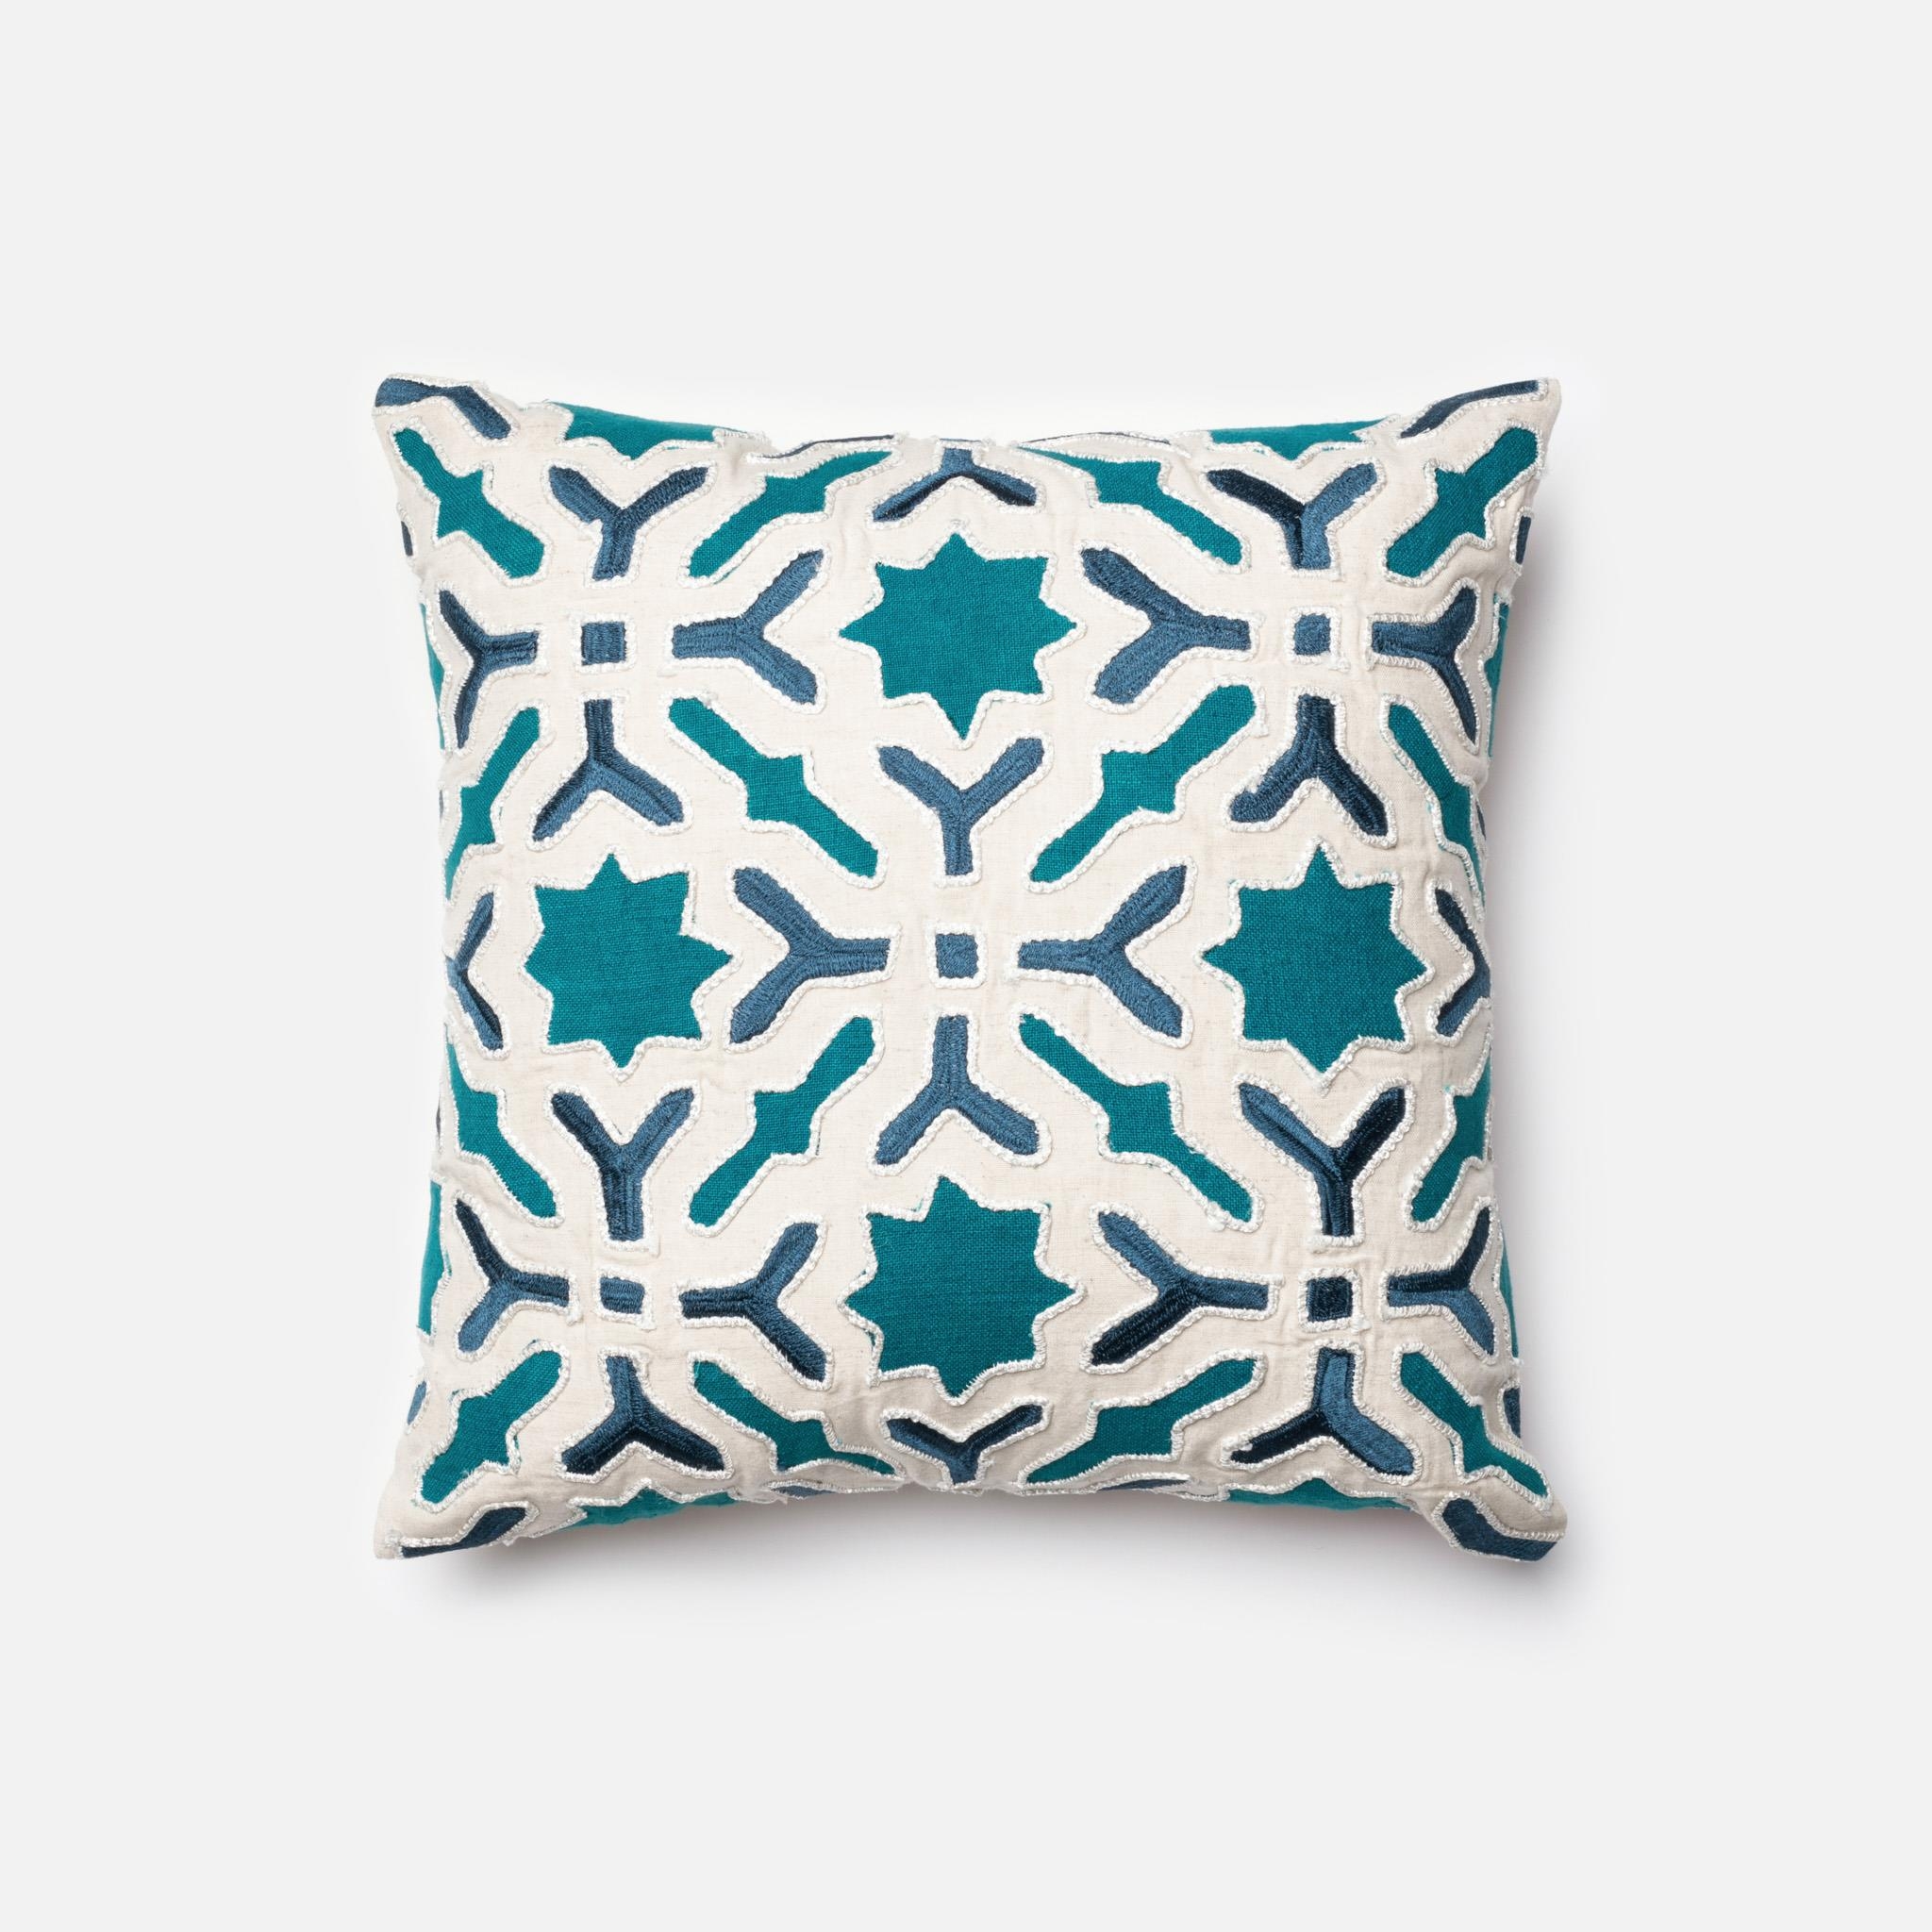 P0014 TEAL / IVORY - 18" x 18" - Insert included - Image 0